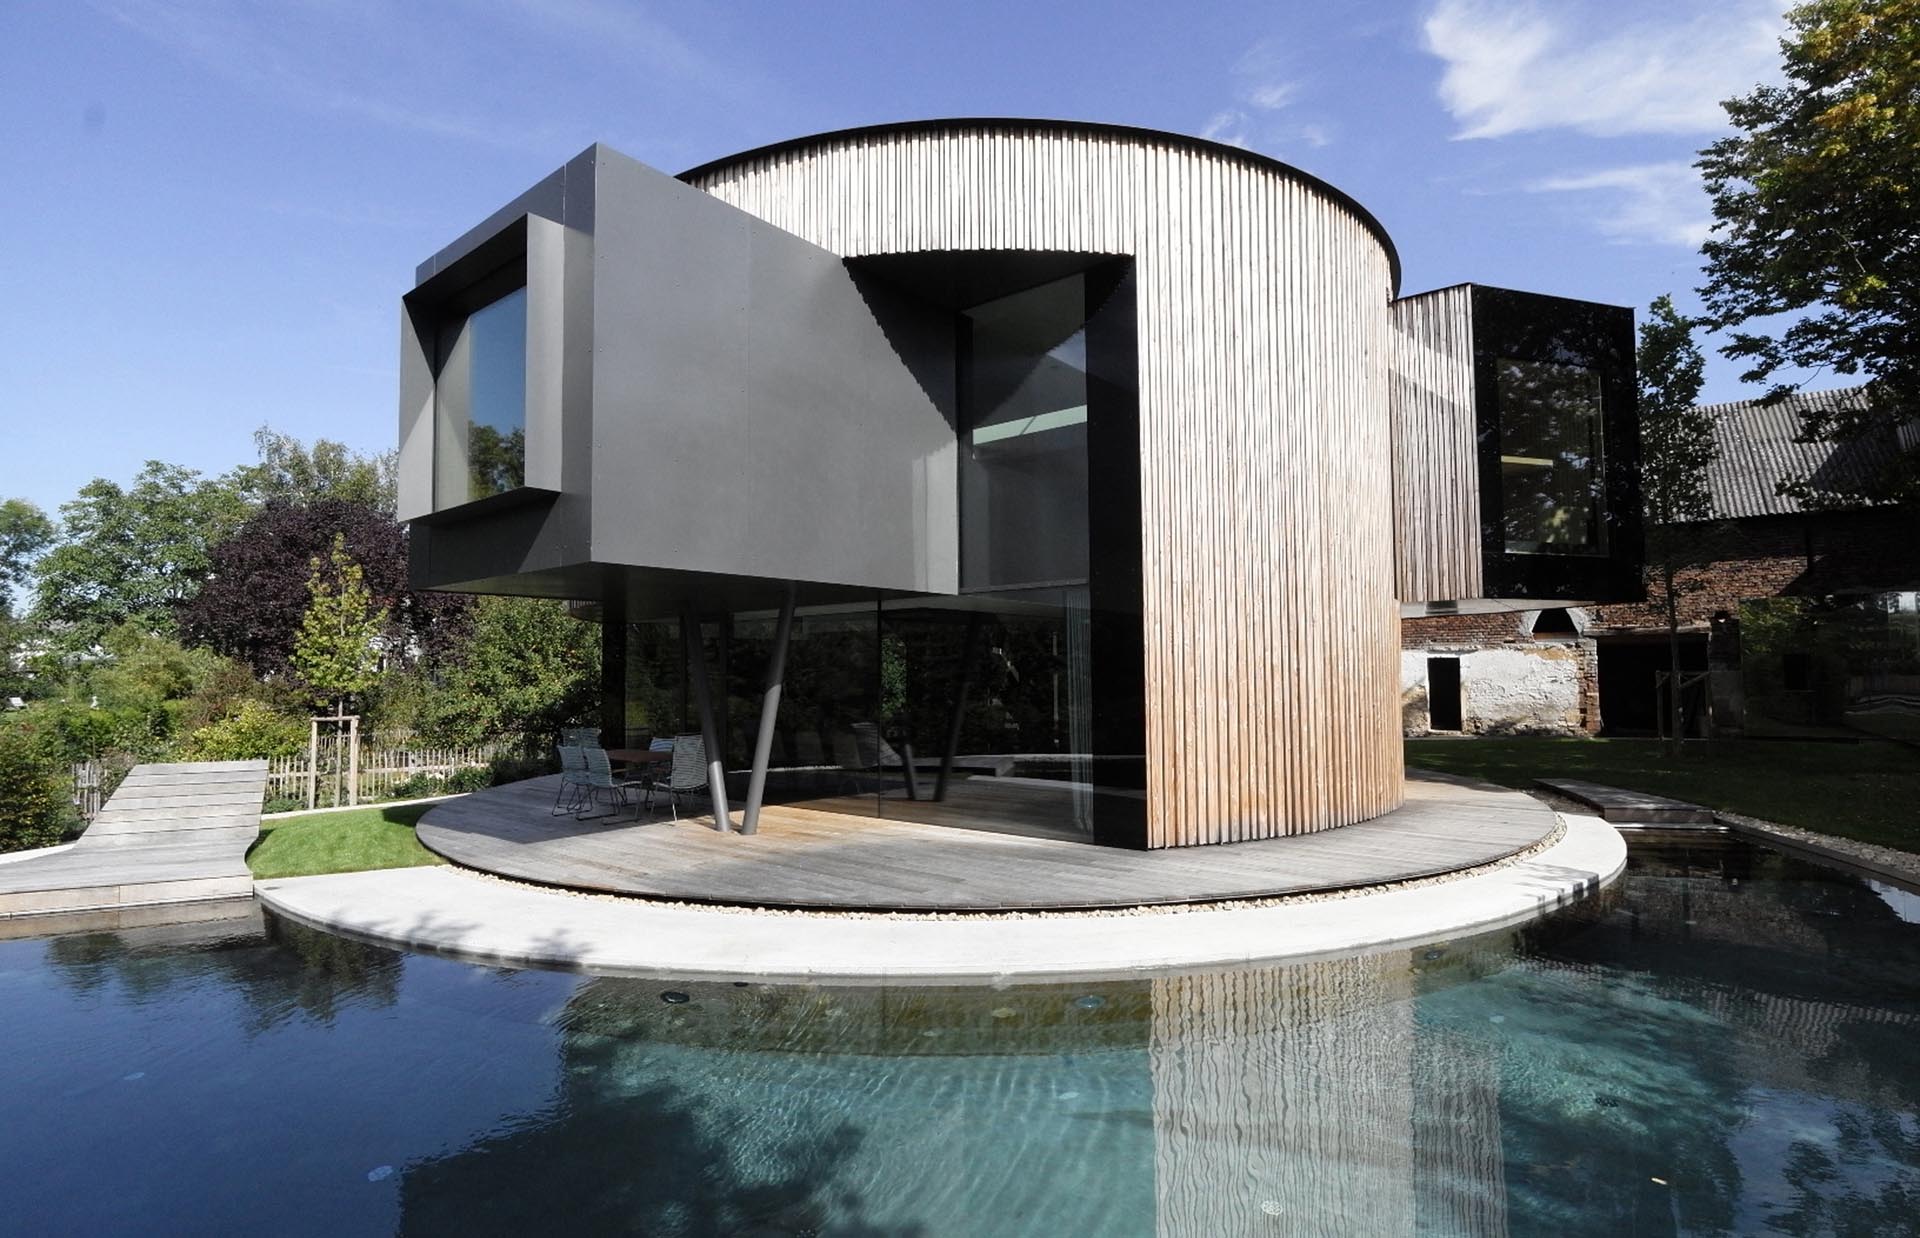 Like a sunflower, this modern home rotates with the course of the sun. In the winter, the heating requirement is minimized due to the solar gains, whereby, in the summer, turning into the shade protects the house from overheating.